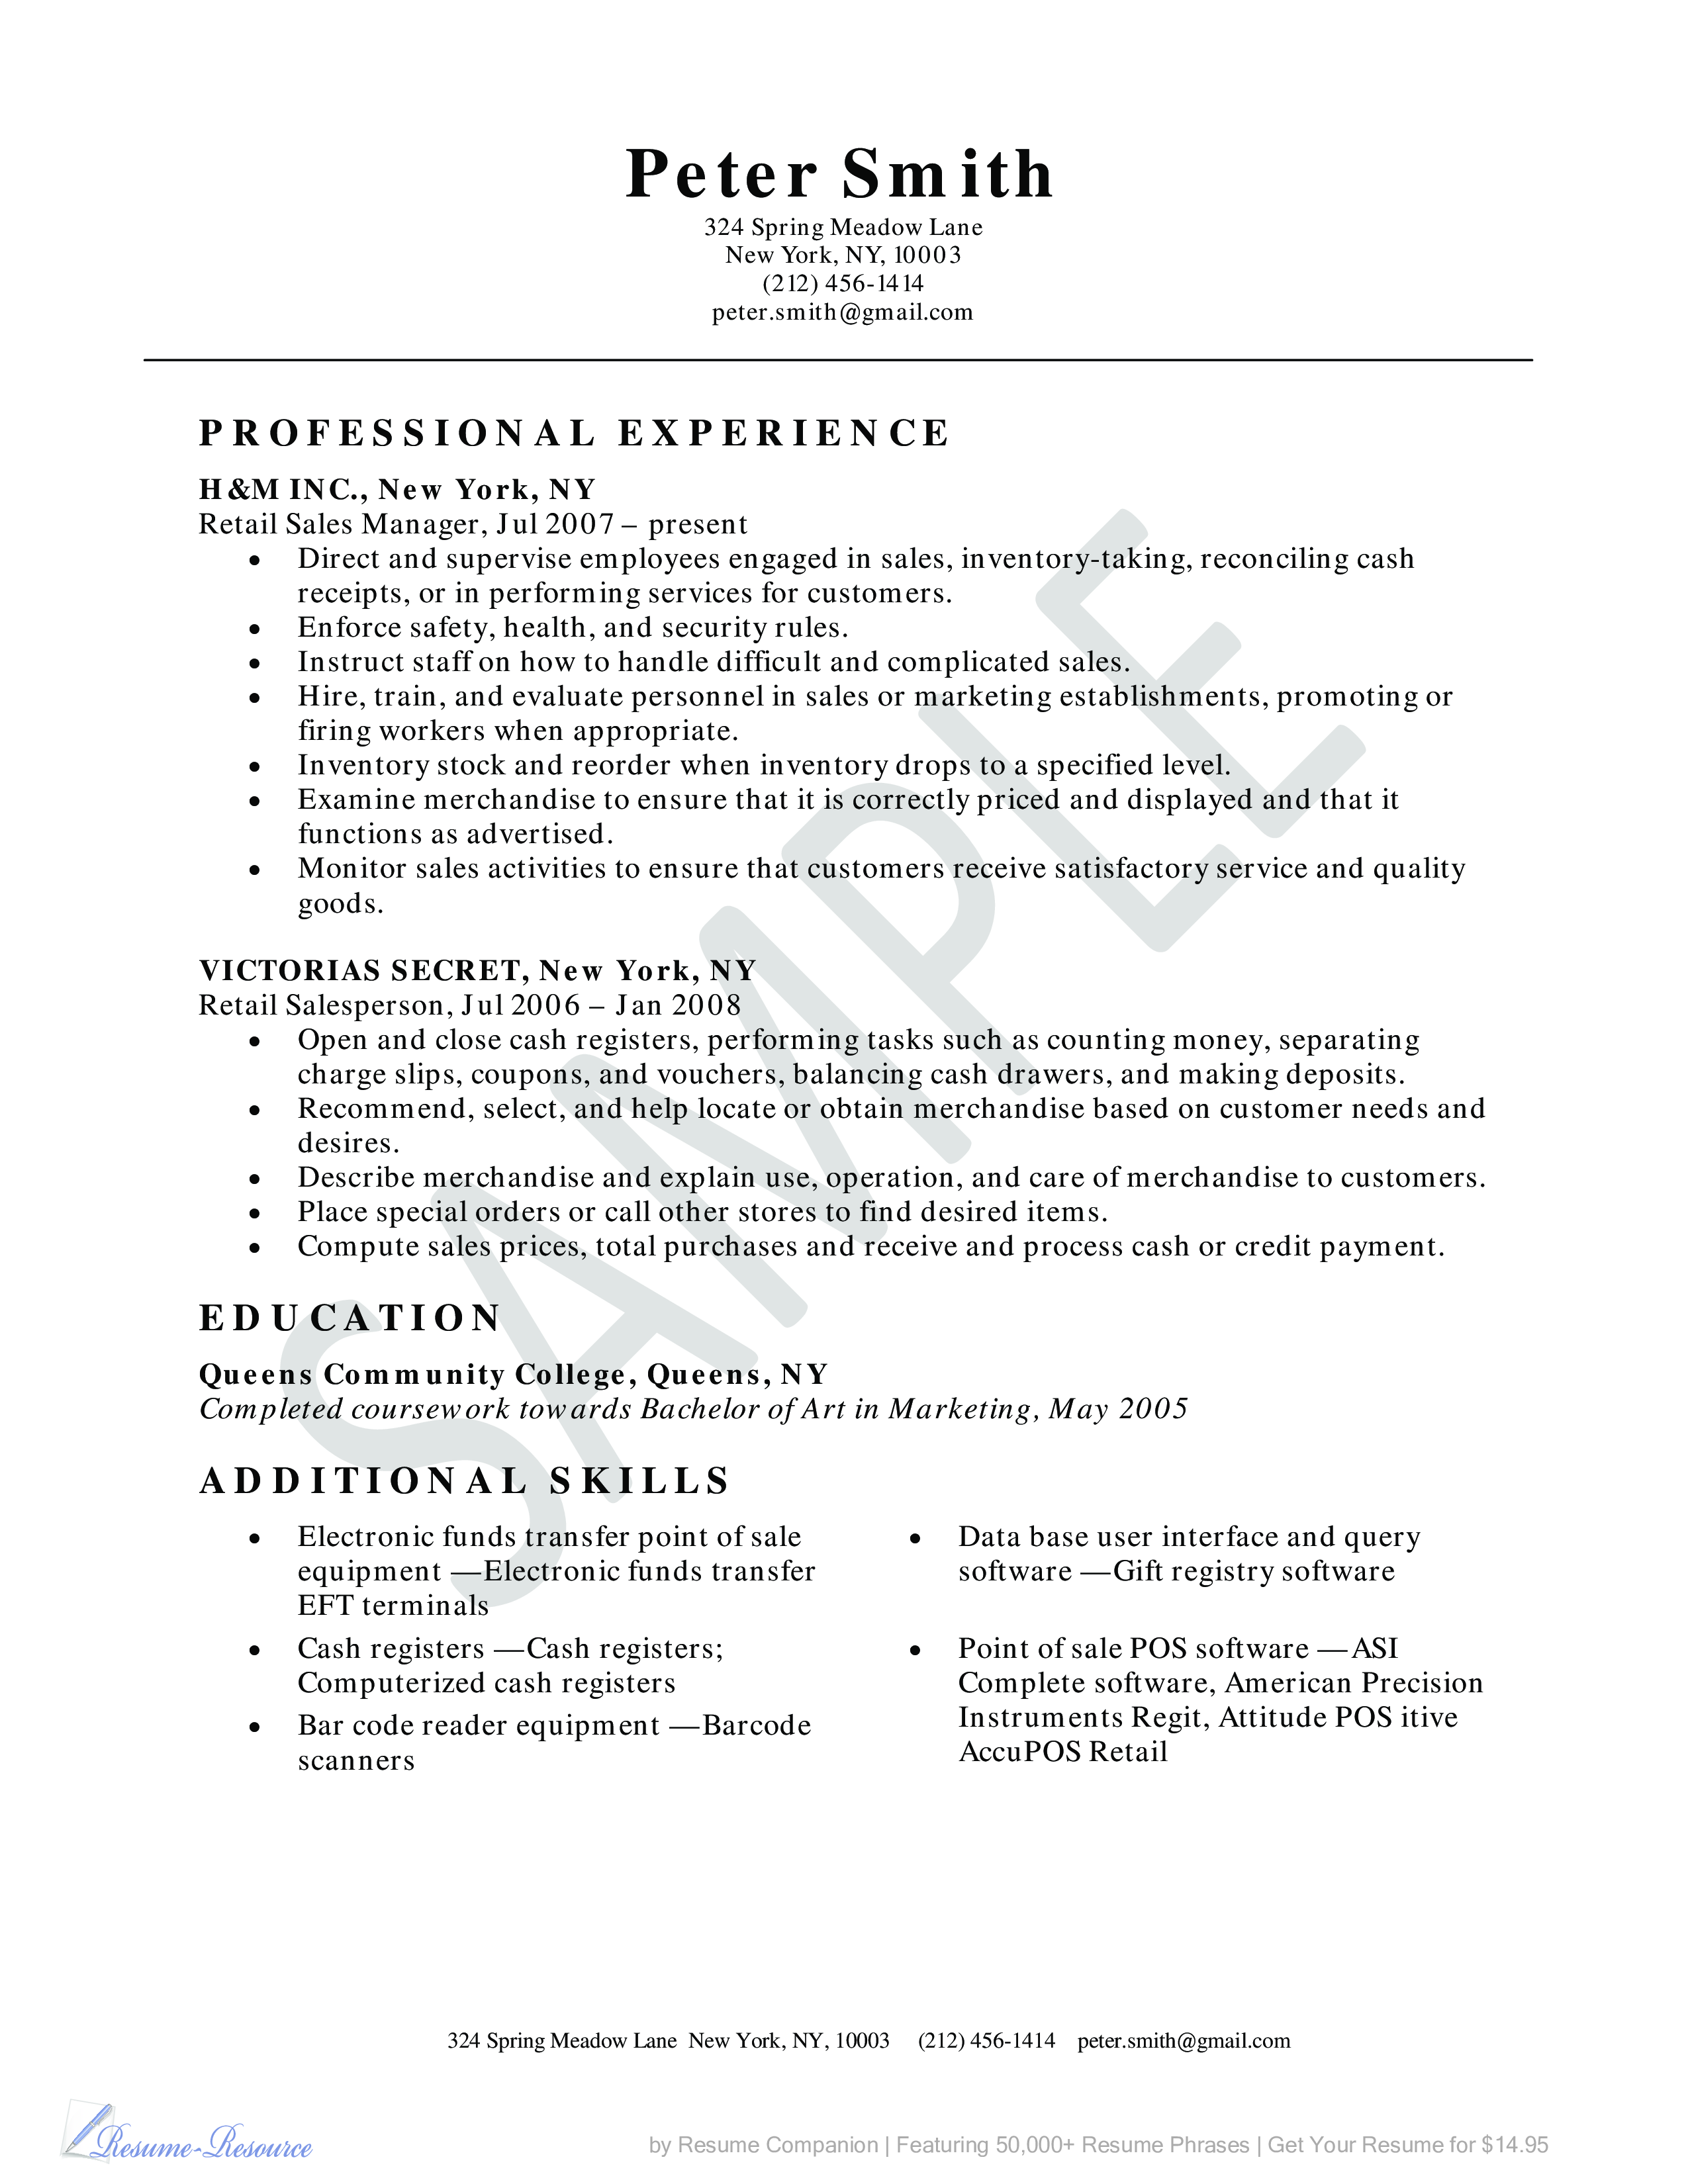 resume format for retail sales